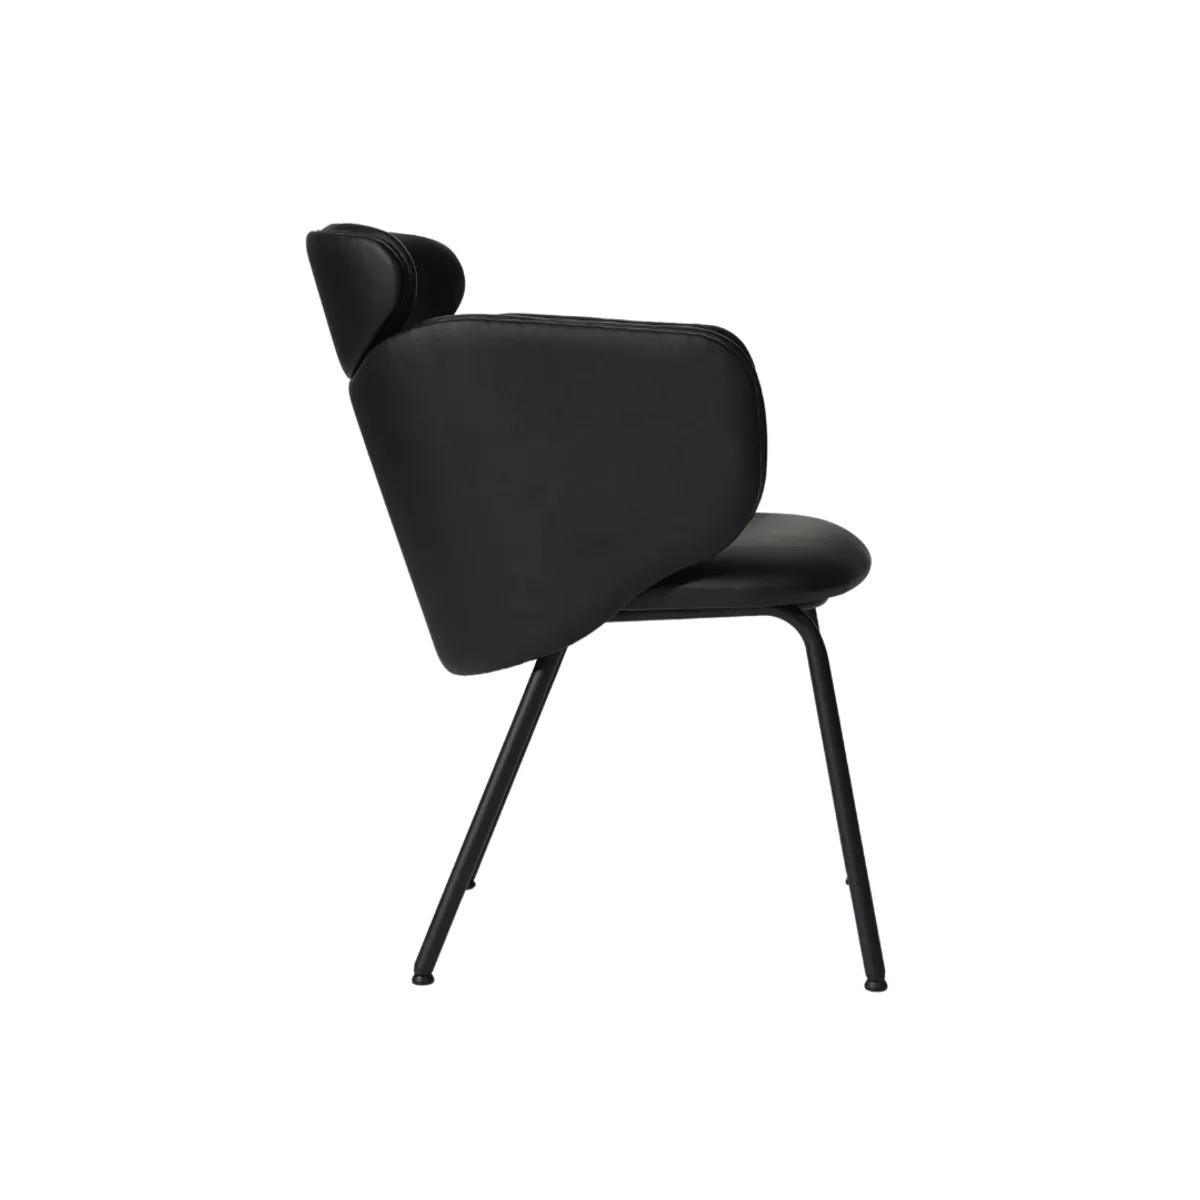 Russo armchair 4+